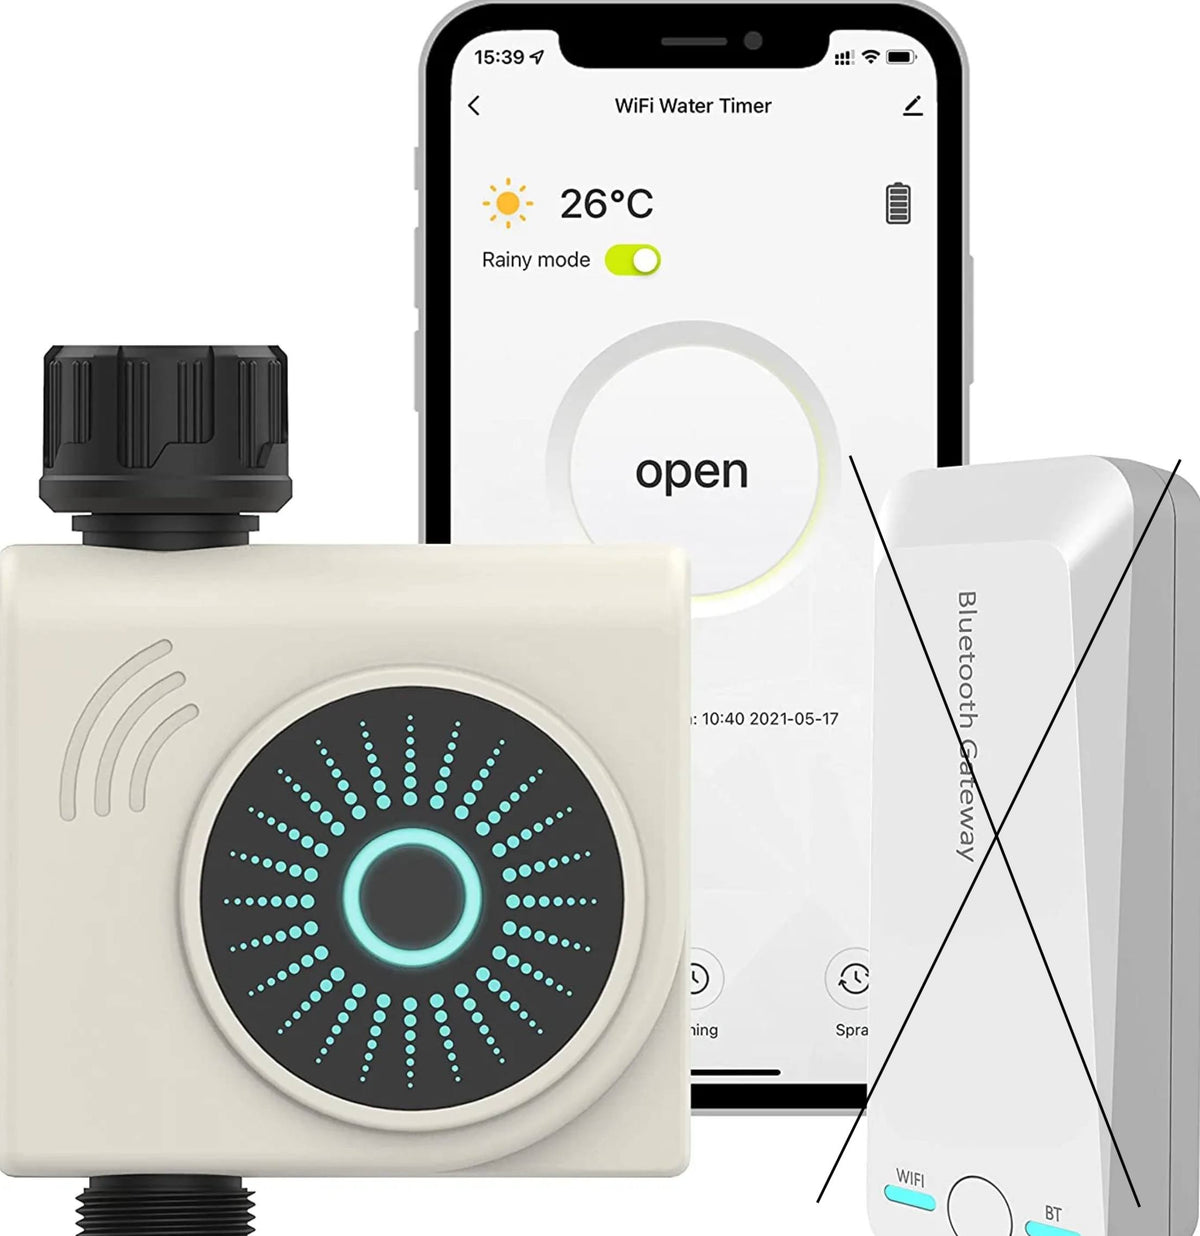 Bluetooth And WiFi Irrigation Programmer, Intelligent Automatic Watering Timer, Garden Watering Control With App Control For Duration And Rain Delay. Up To 8 Bar Pressure!